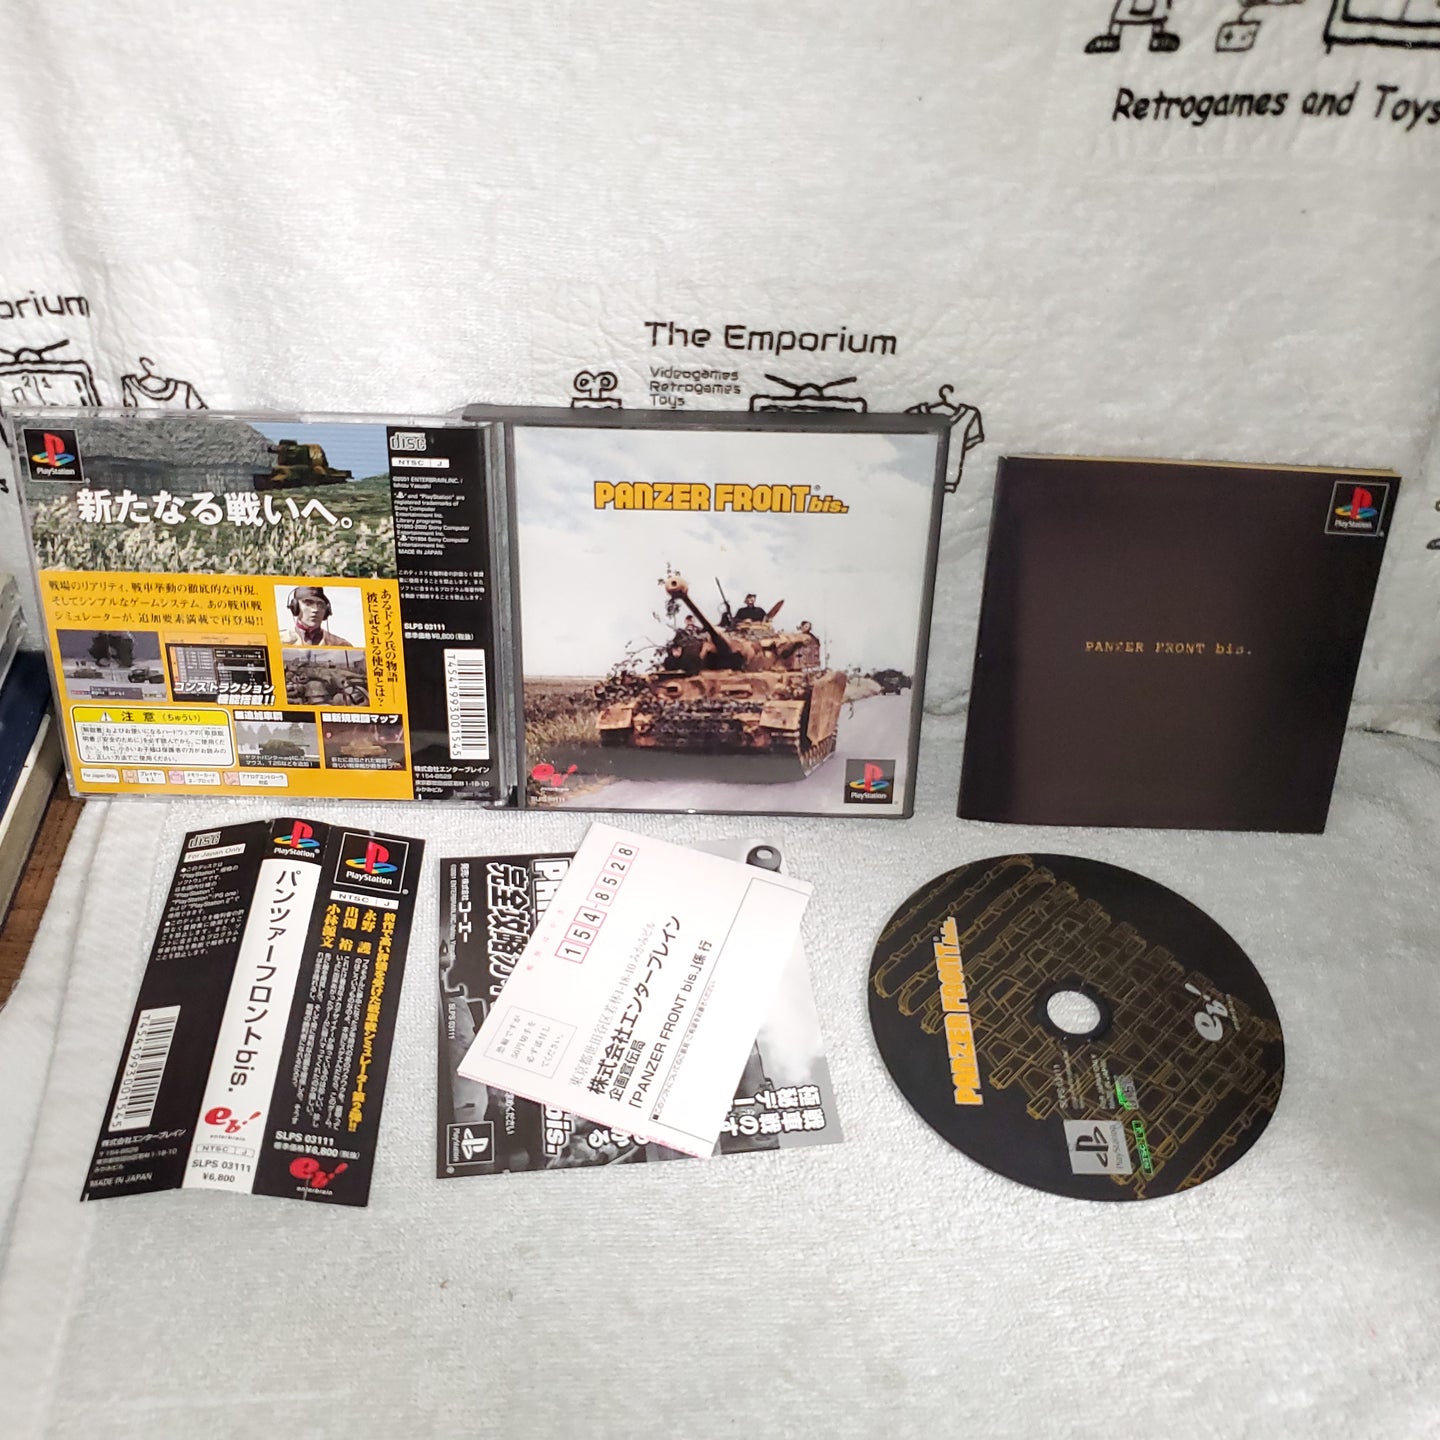 panzer front .bis - sony playstation ps1 japan